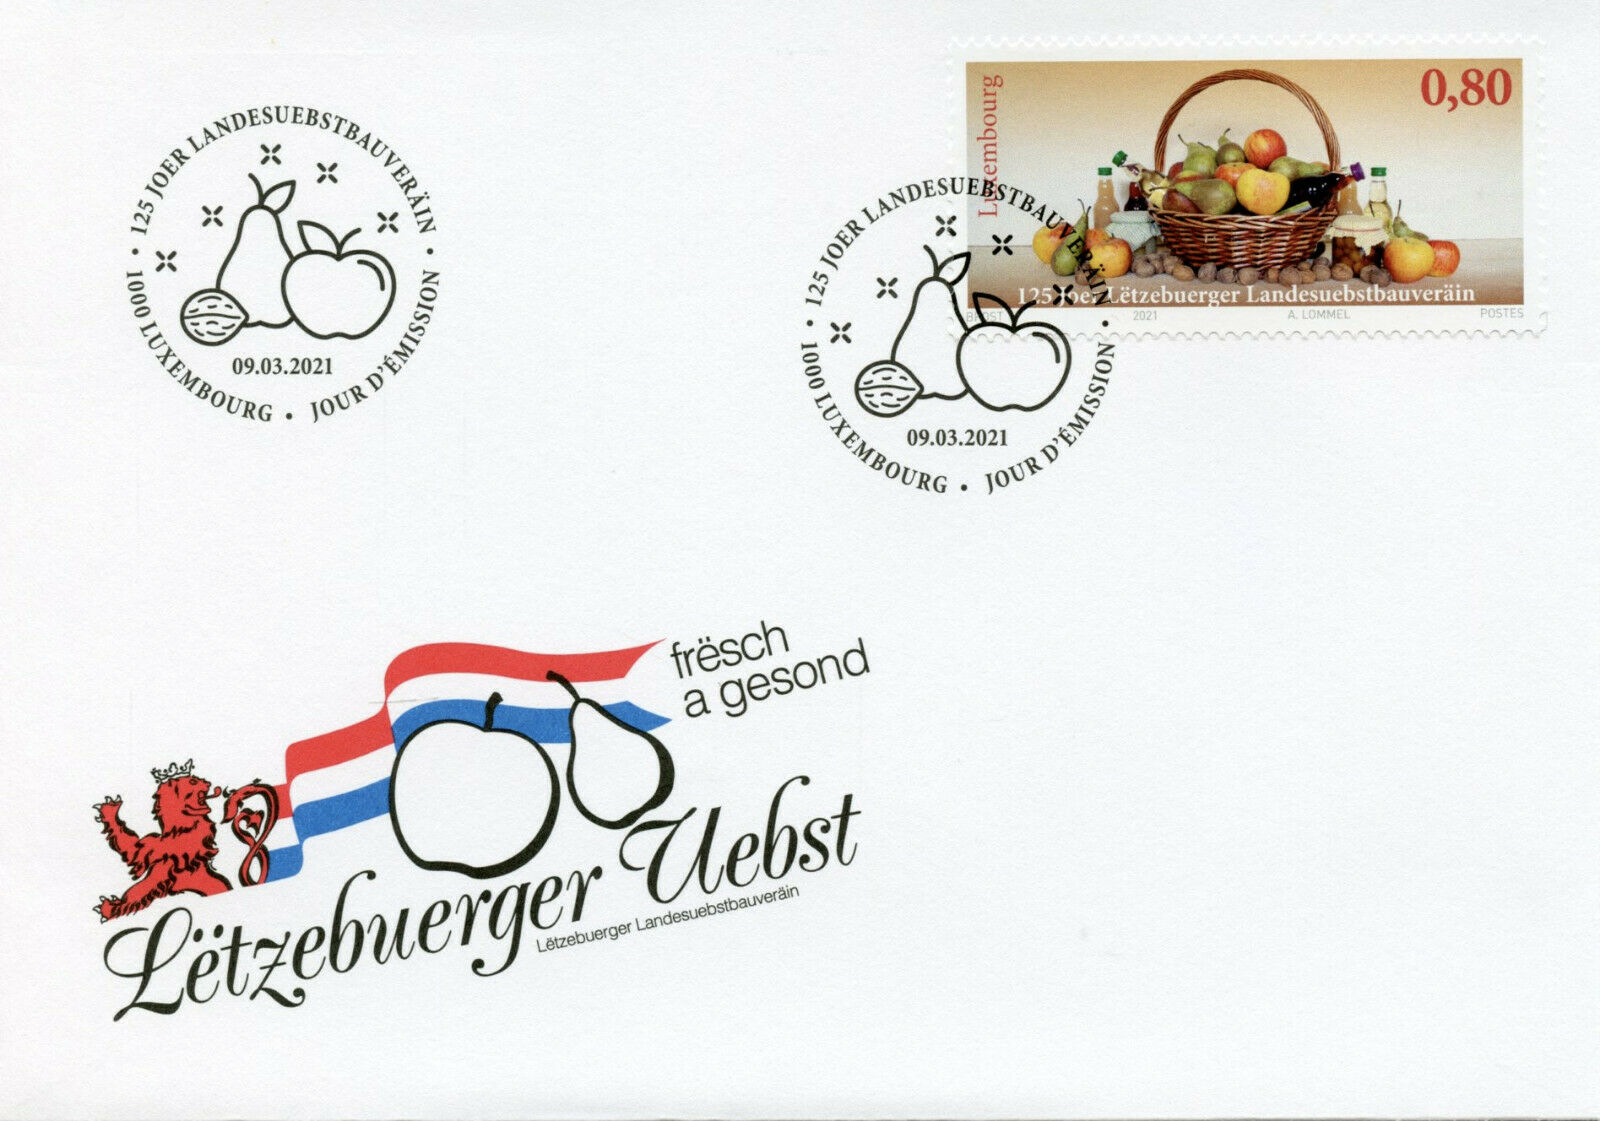 Luxembourg Fruits Stamps 2021 FDC Letzebuerger Landesuebstbauverain 1v Set